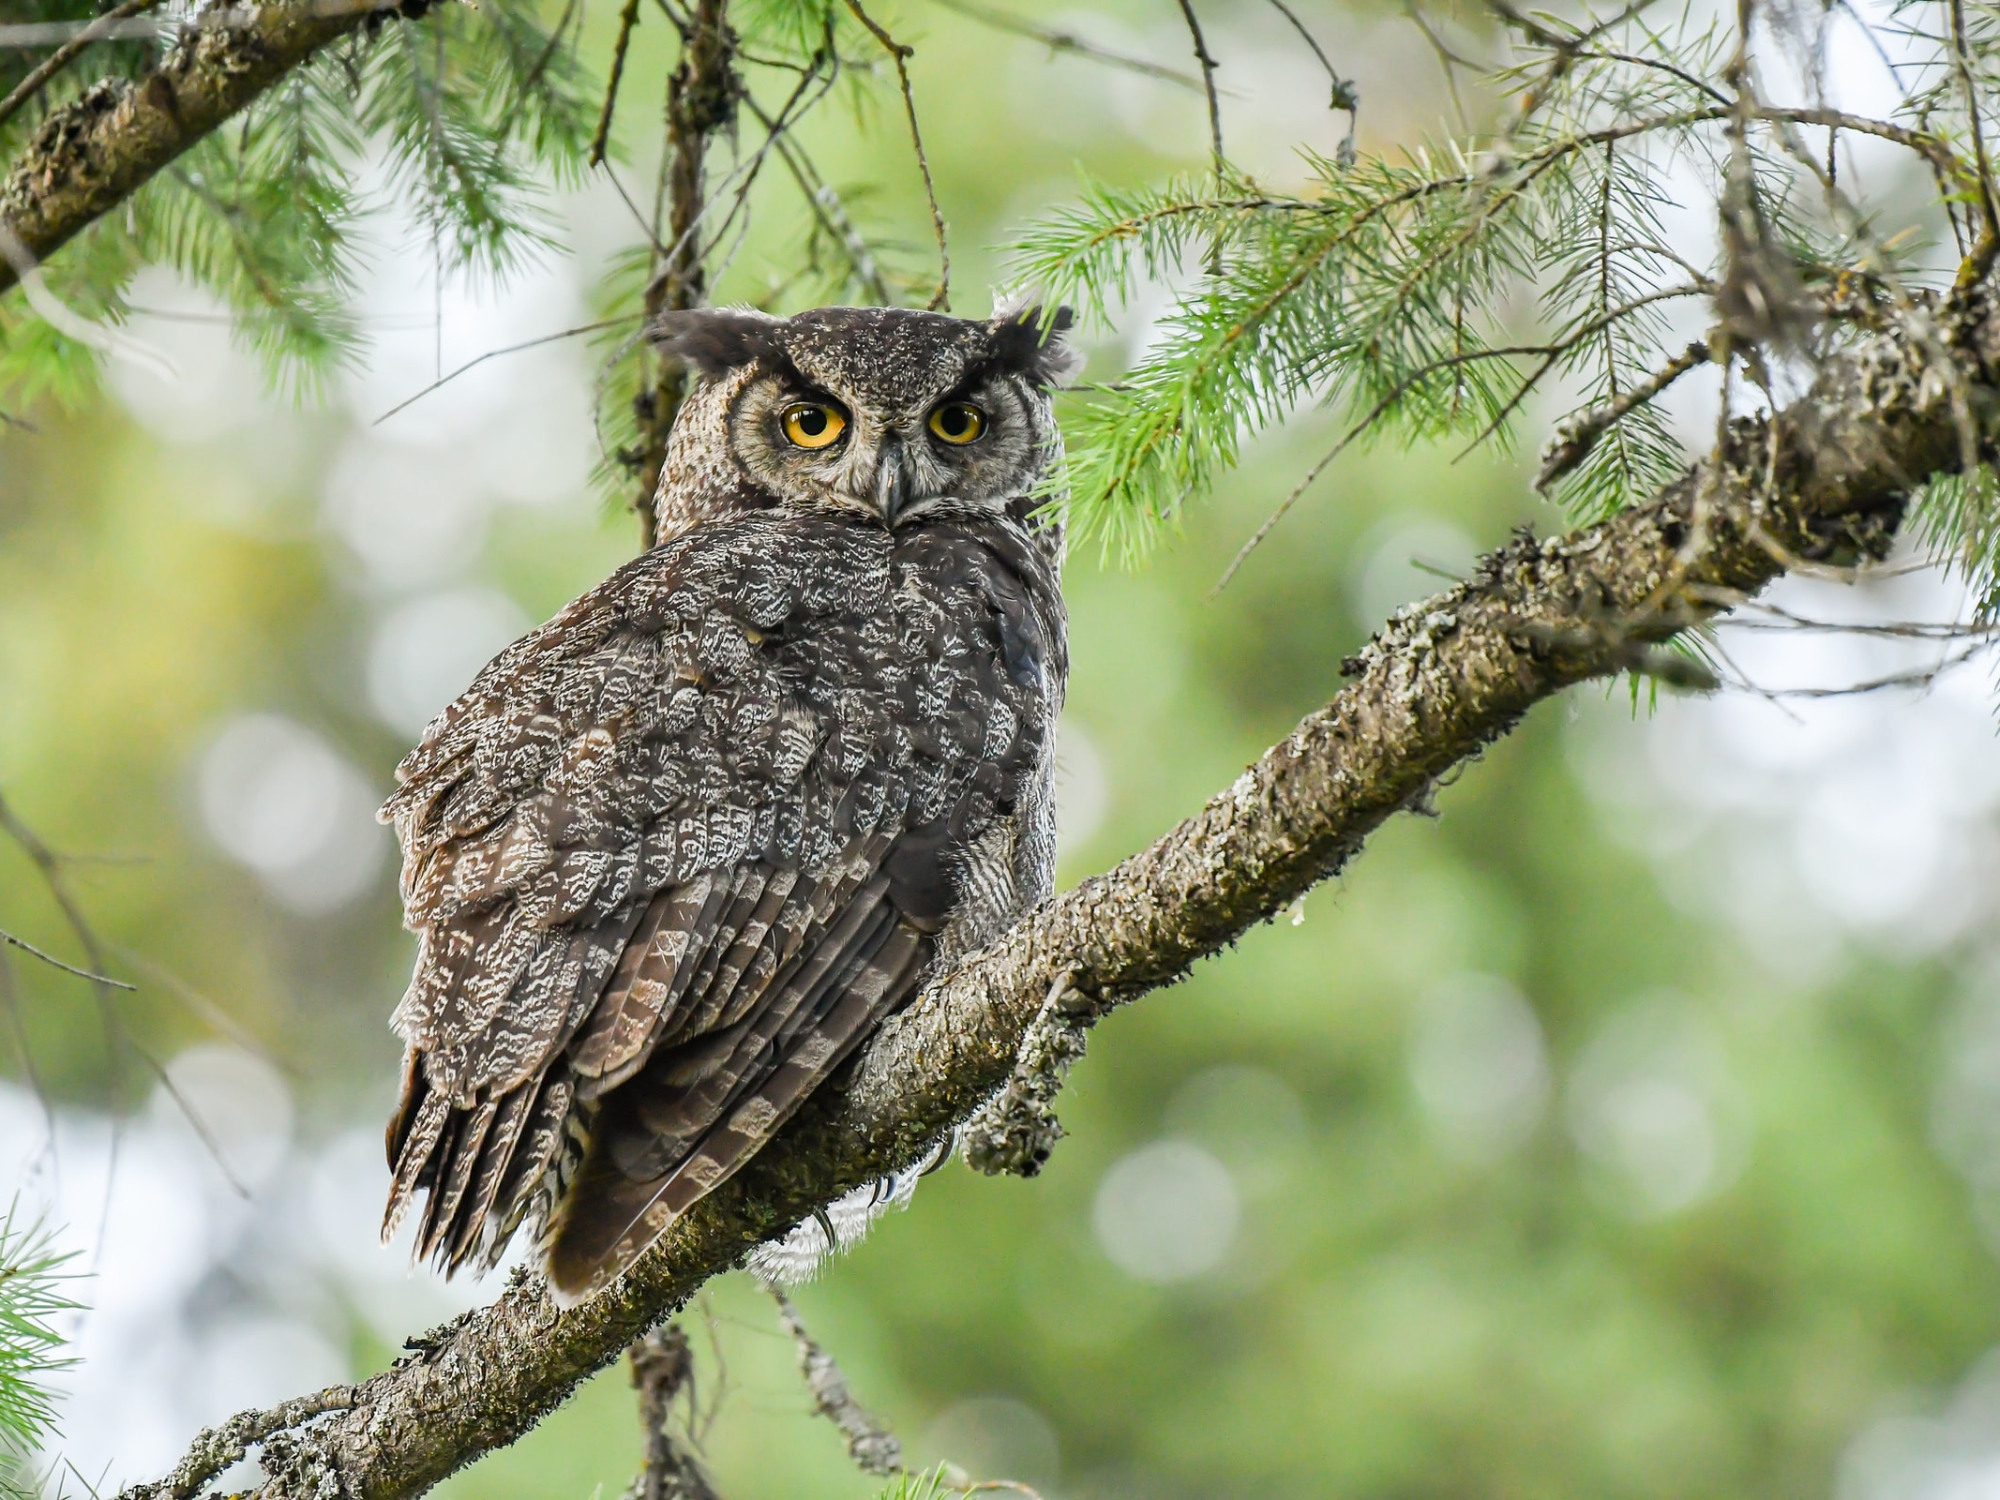 How to attract owls to your yard | Popular Science